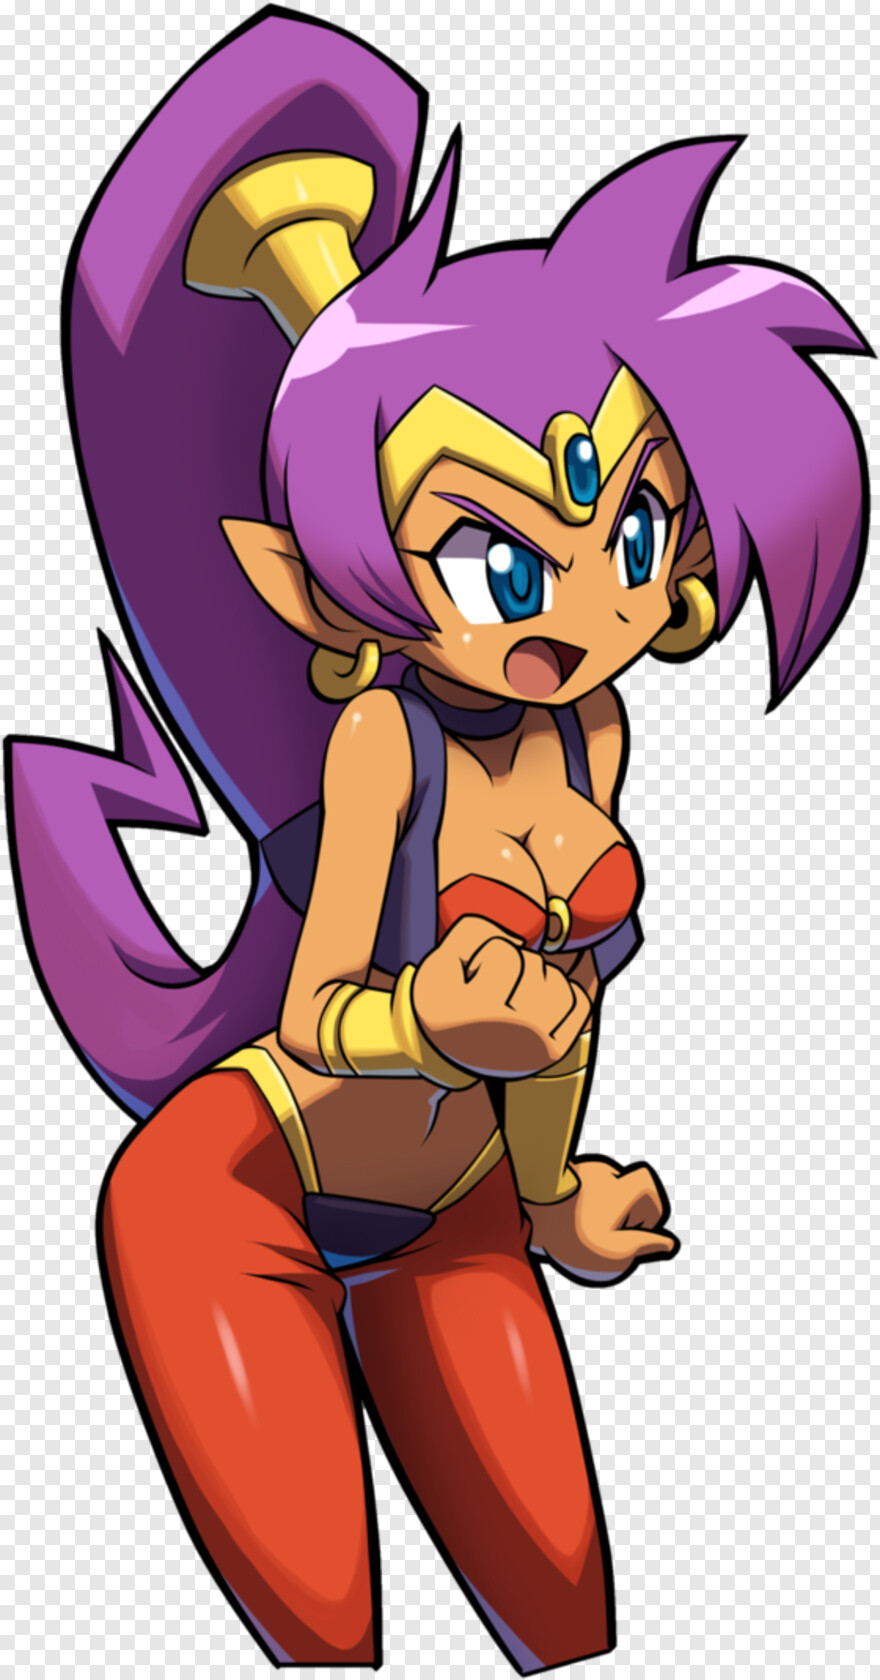 Shantae, the Half Genie Protector of Scuttle Town! (A 